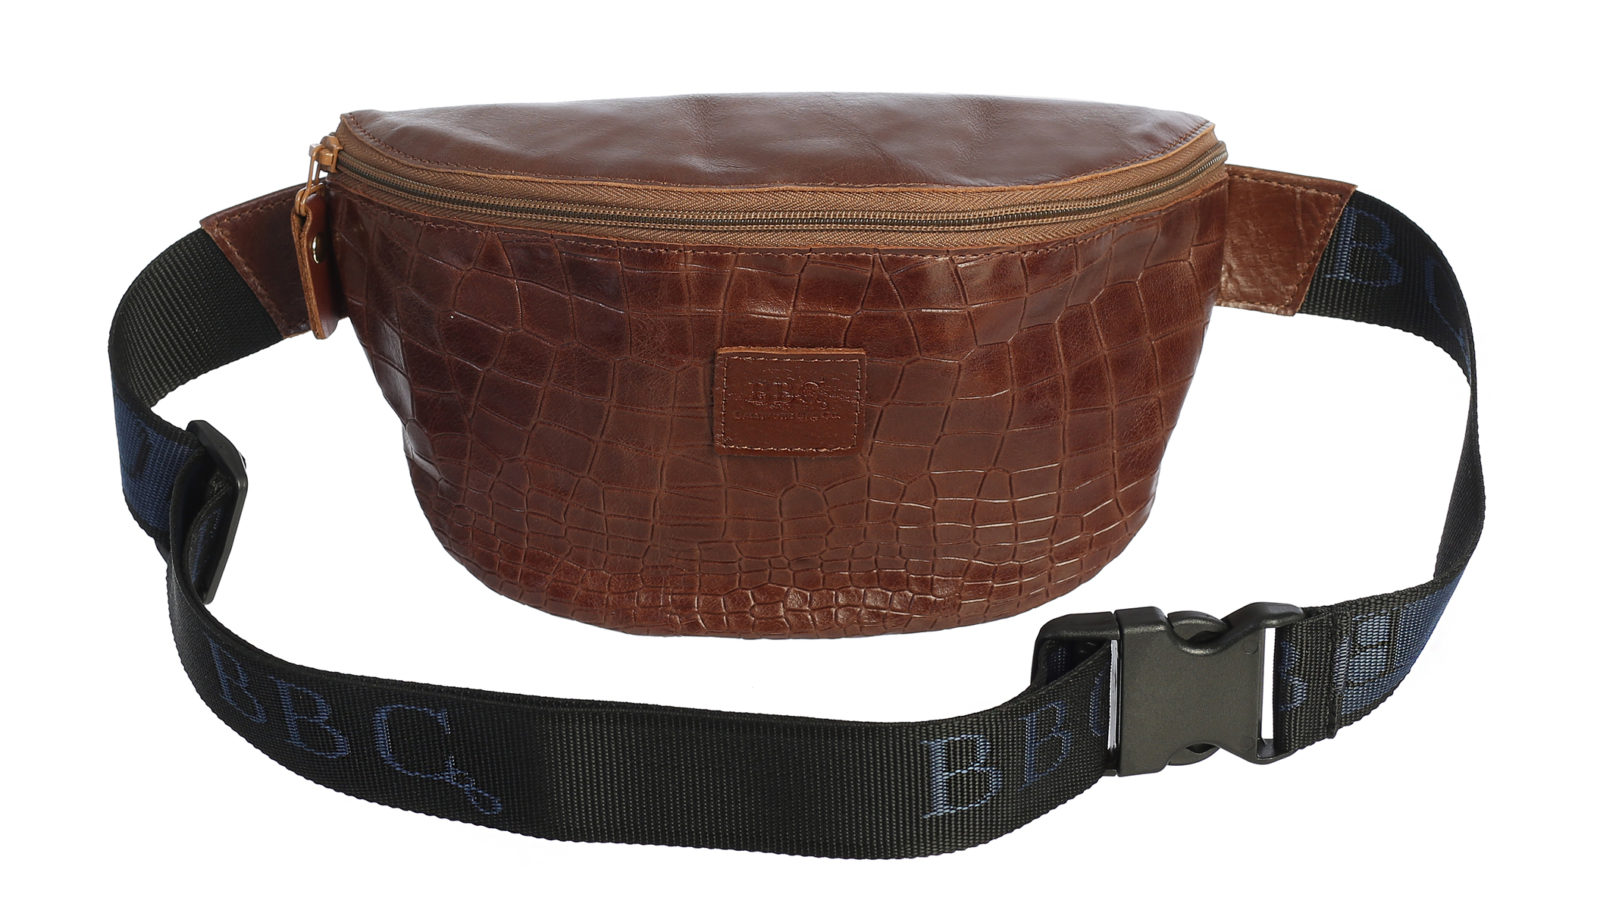  Mens Fanny Pack, Rugged Genuine Leather Waist Bags for Men  Bumbag Waist Pack for Hands-free Crocodile